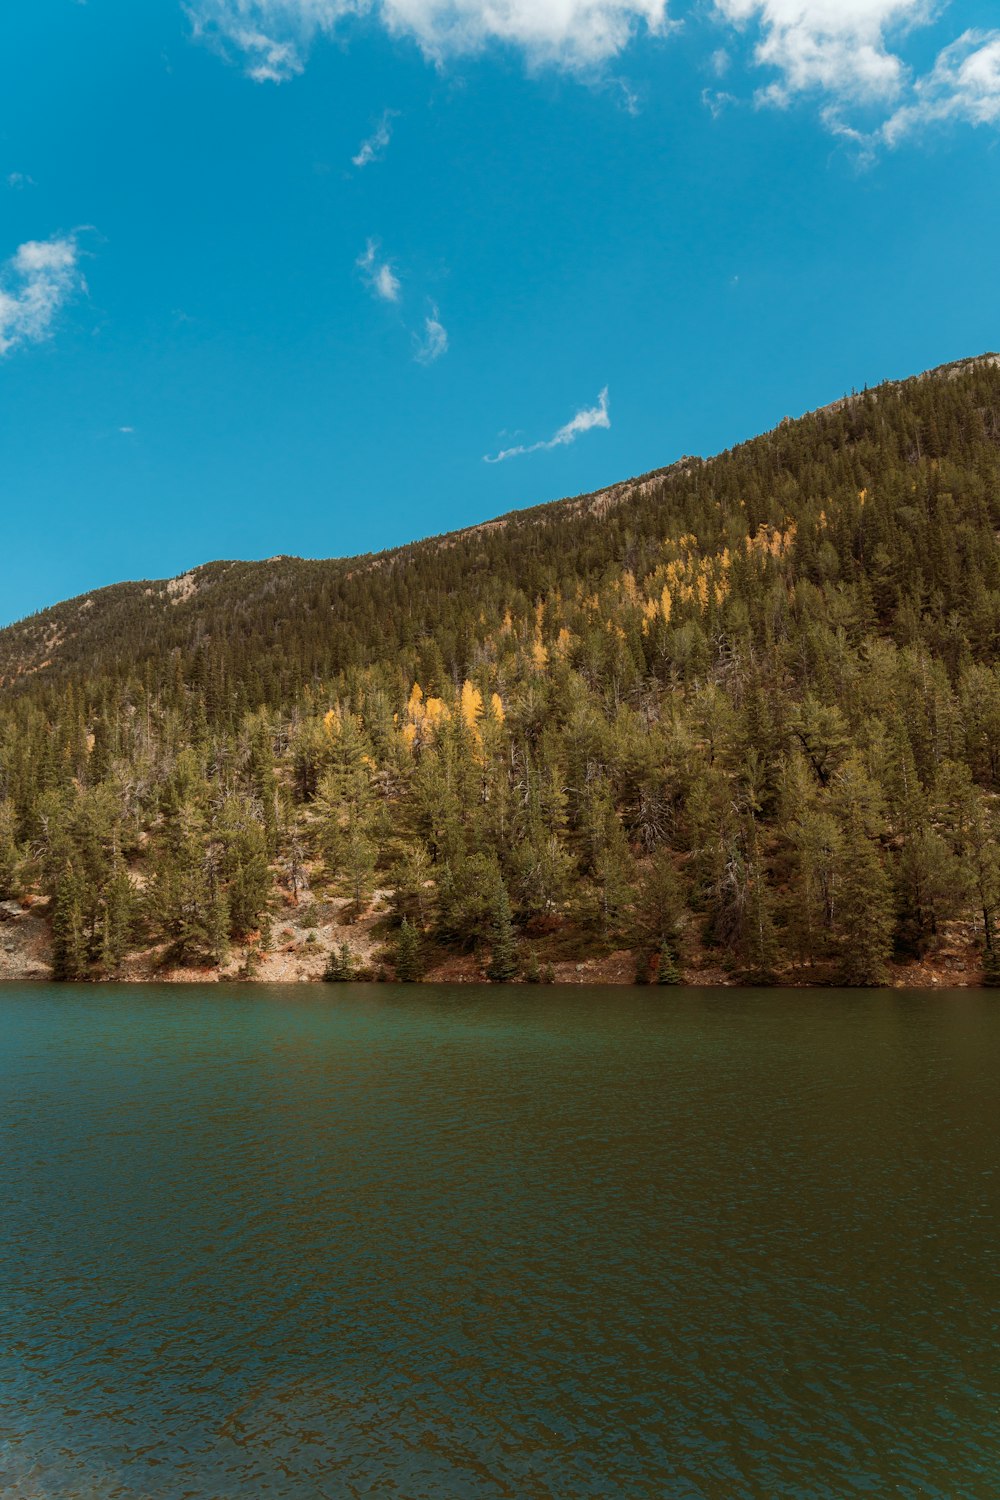 a lake surrounded by a forest under a blue sky